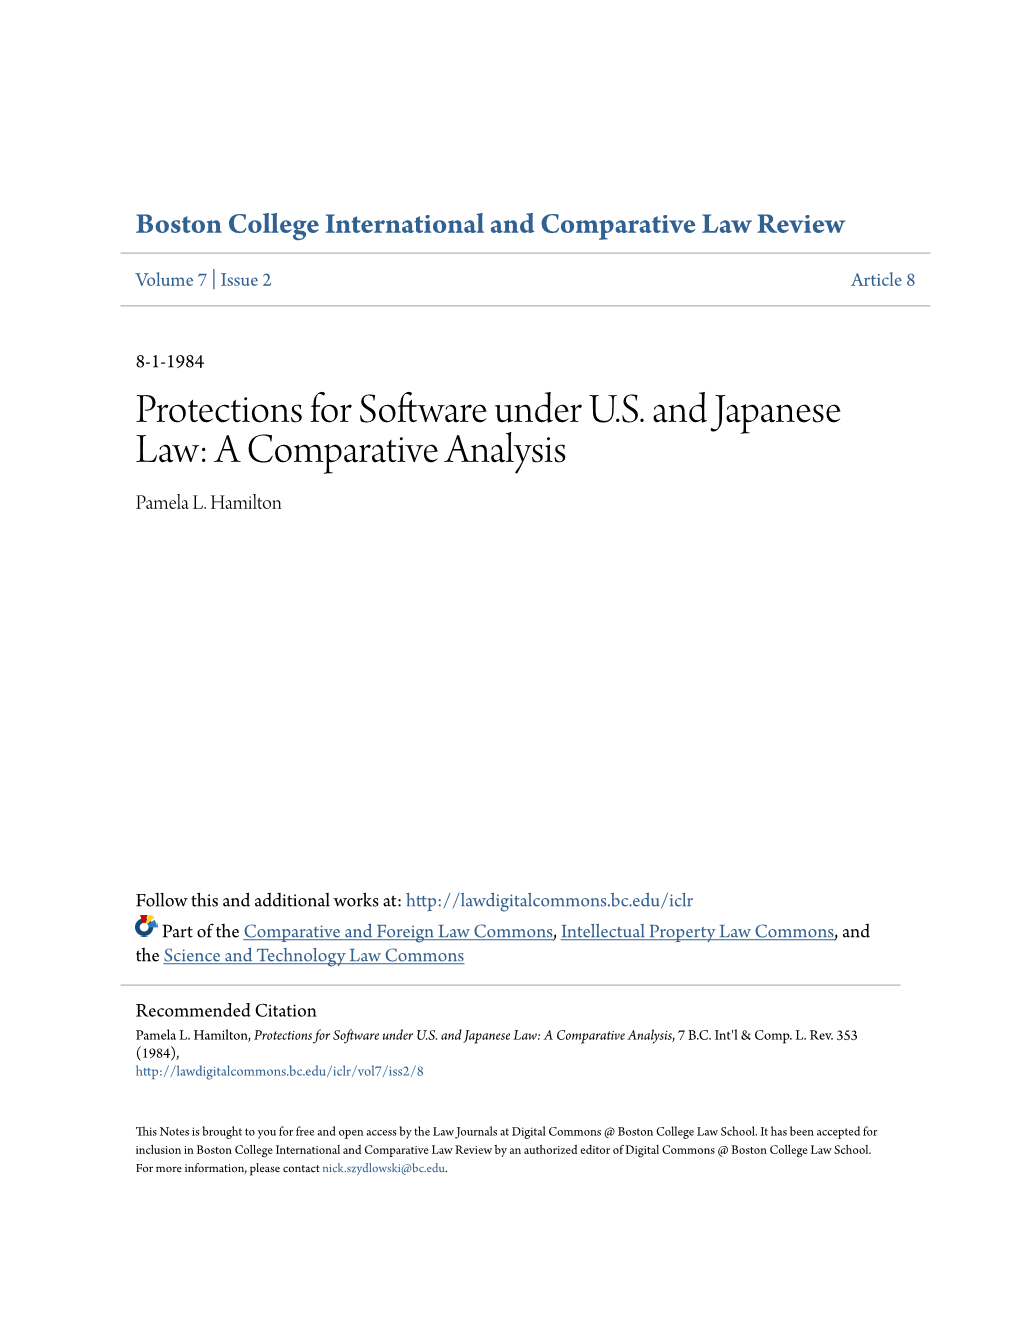 Protections for Software Under US and Japanese